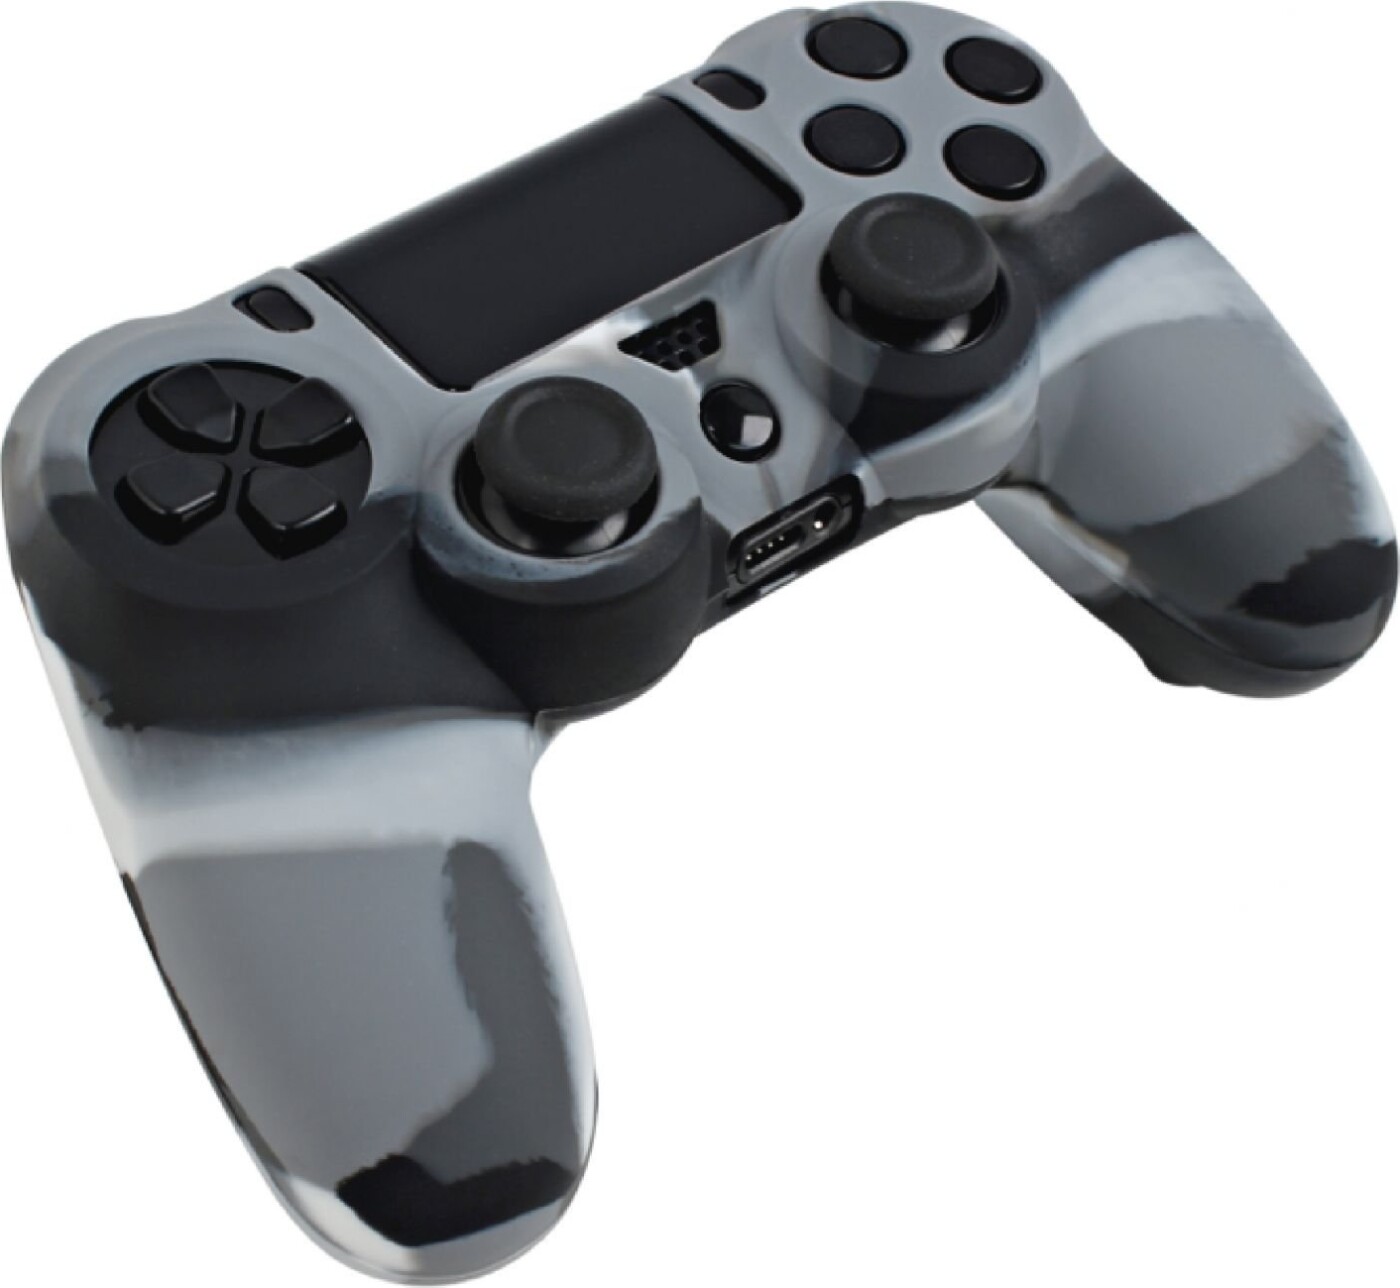 Ps4 Controller Skin - Grå Camouflage